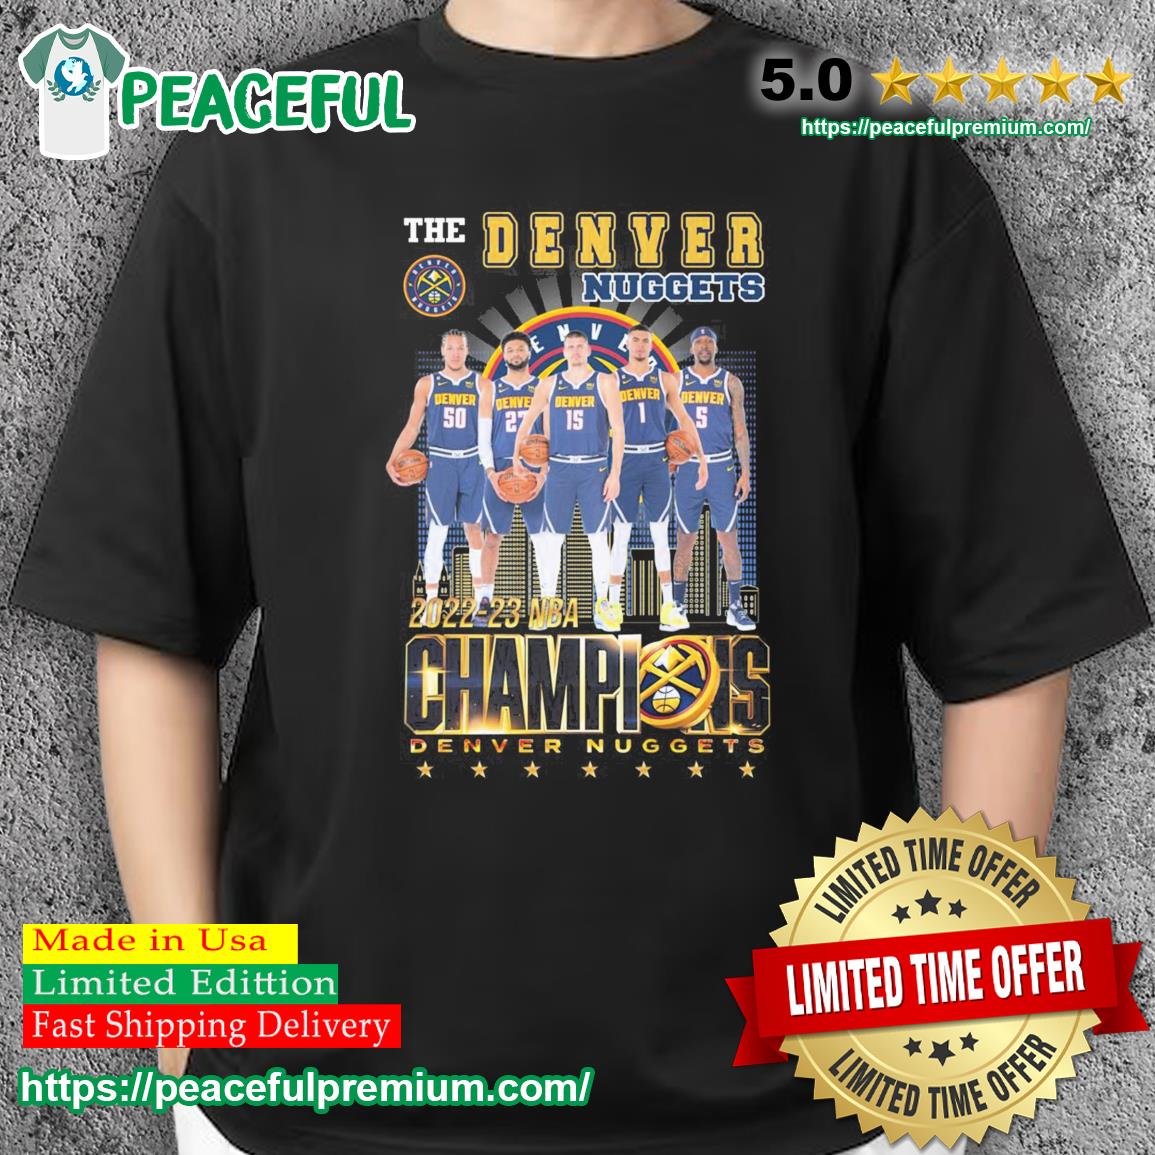 Where you can get Denver Nuggets NBA Finals gear